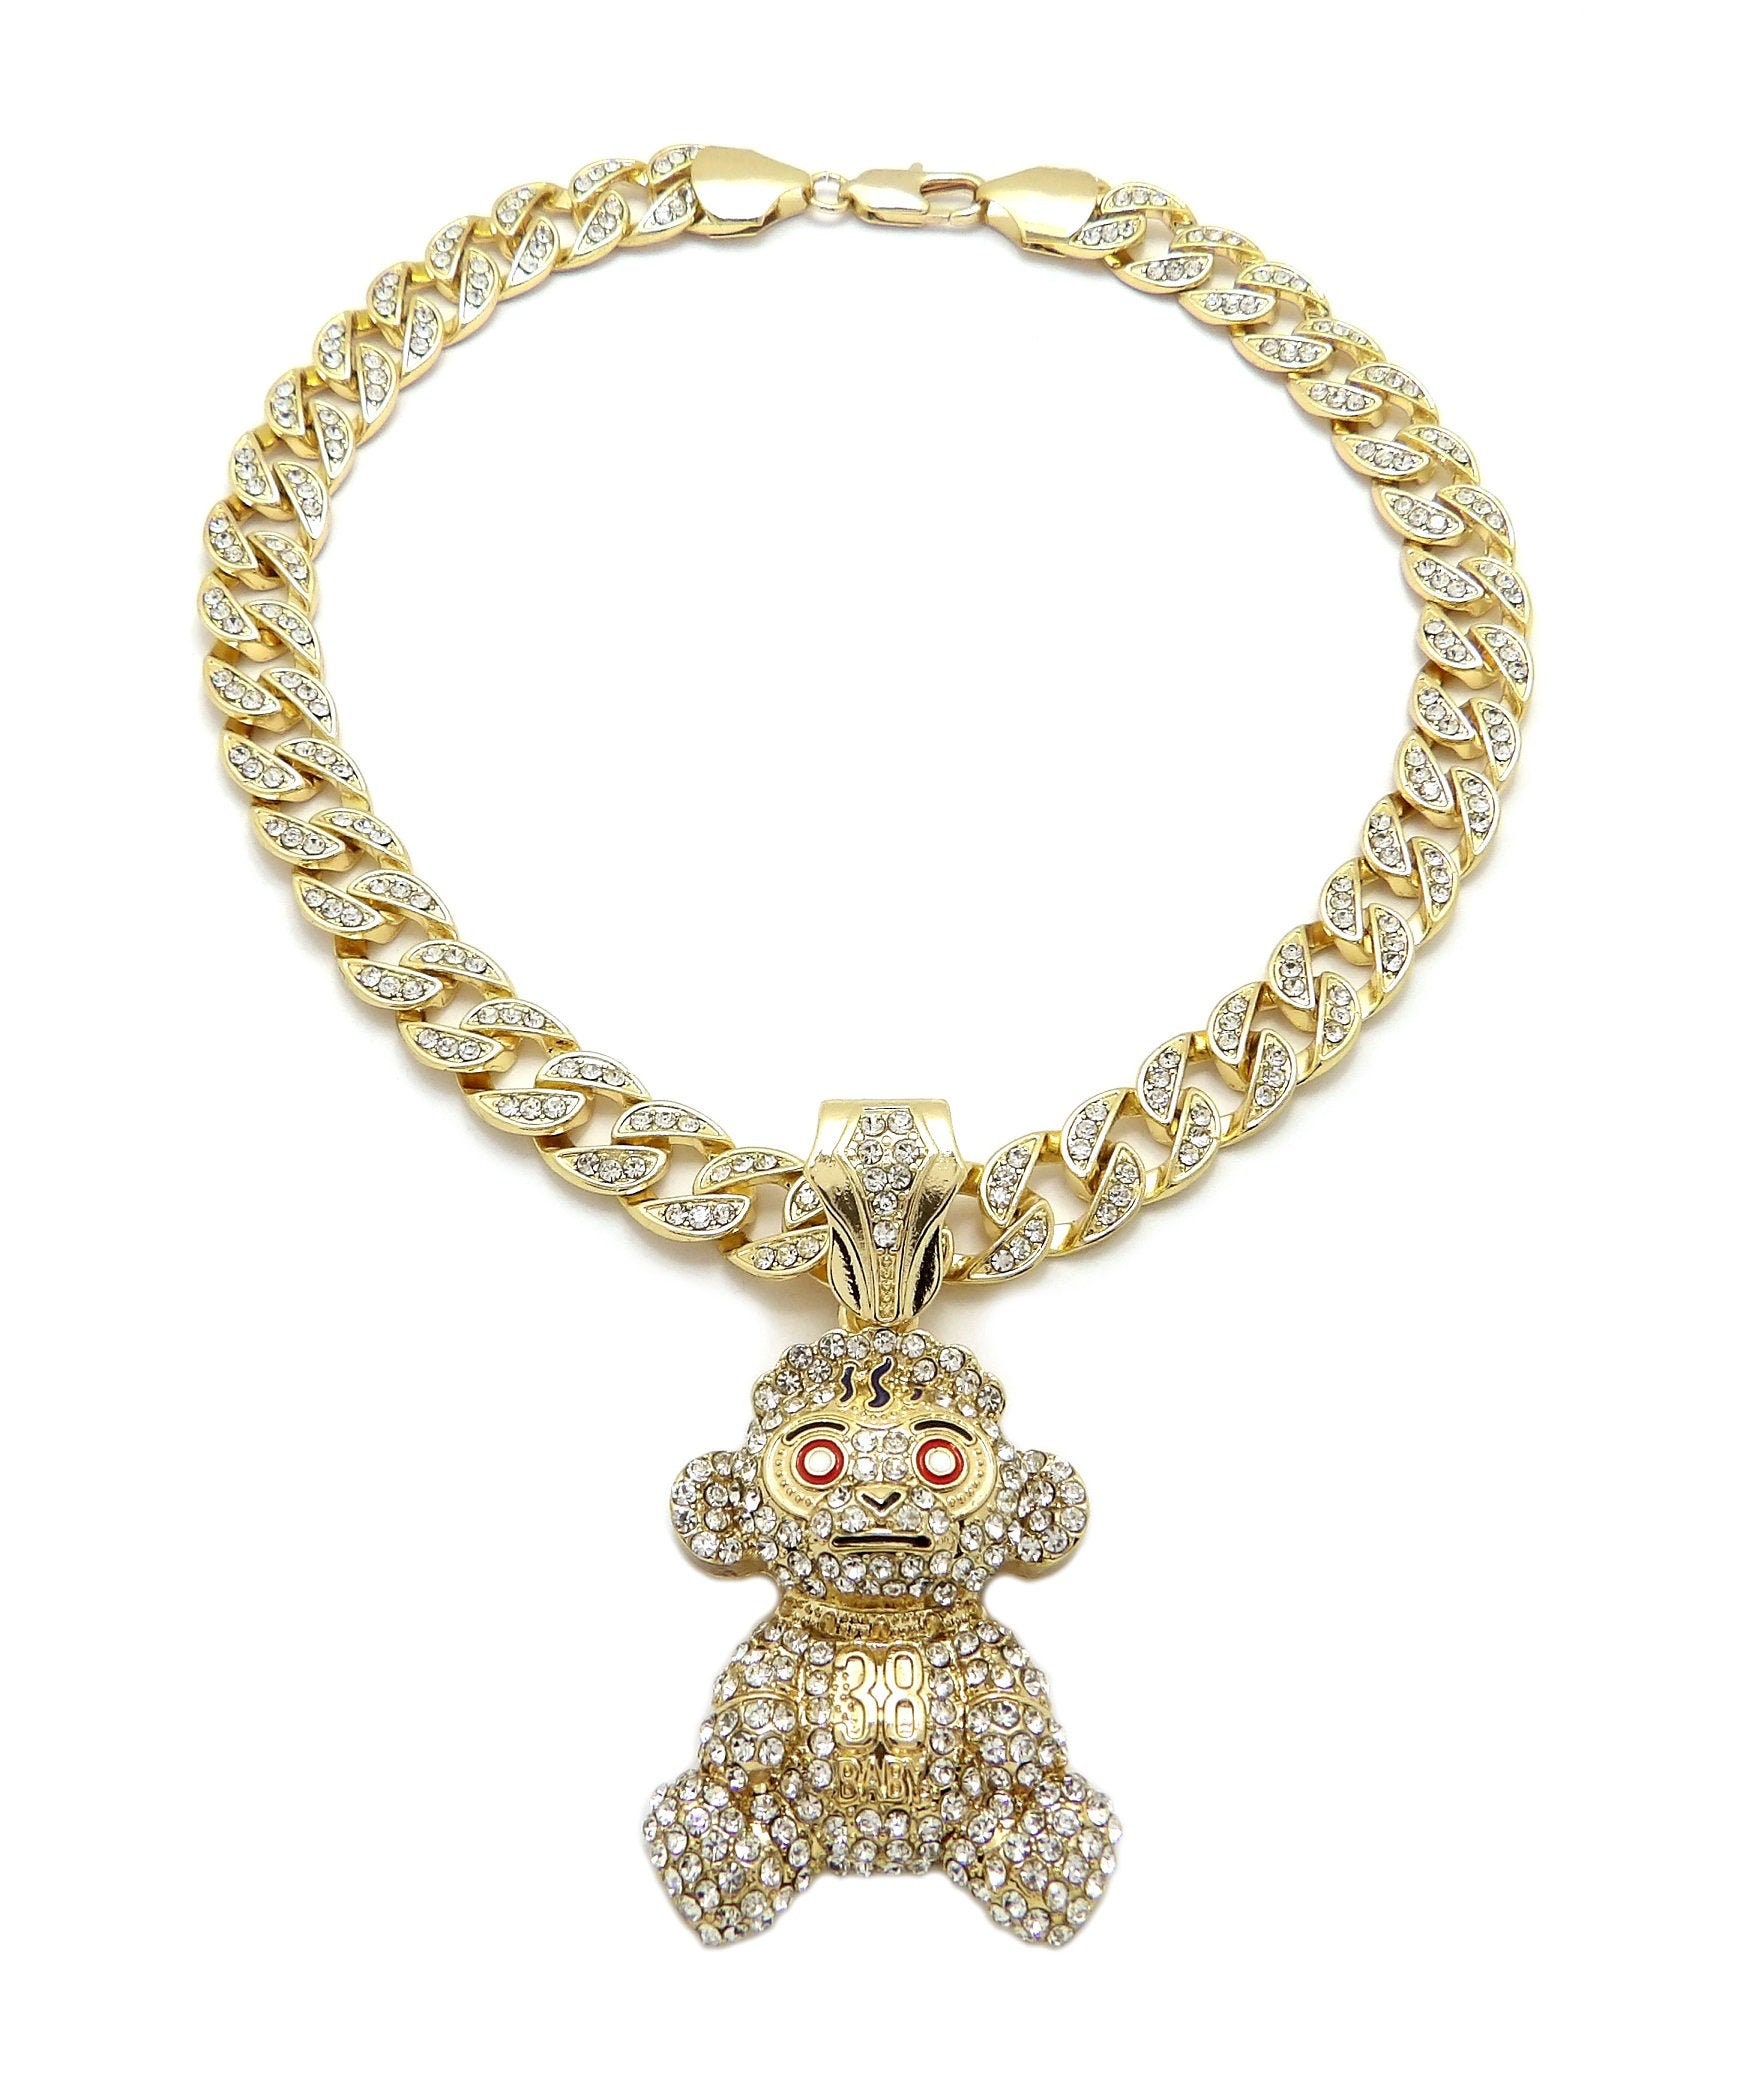 CapCut new nba youngboy chain from shyne jewelry as a gift 🎁 #ybbet